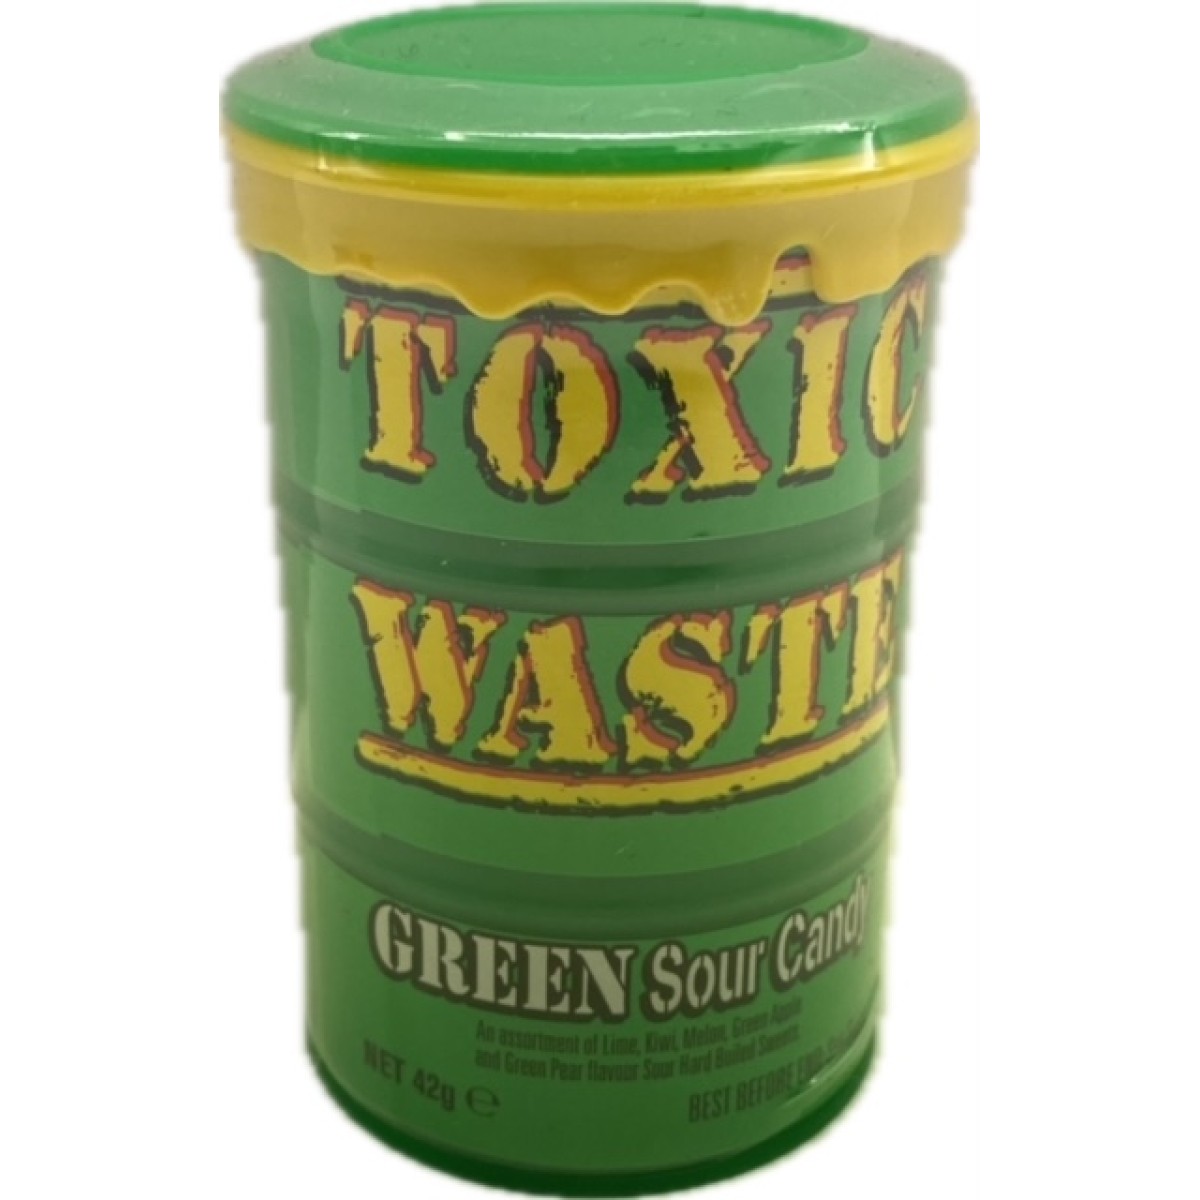 Toxic waste green sour candy